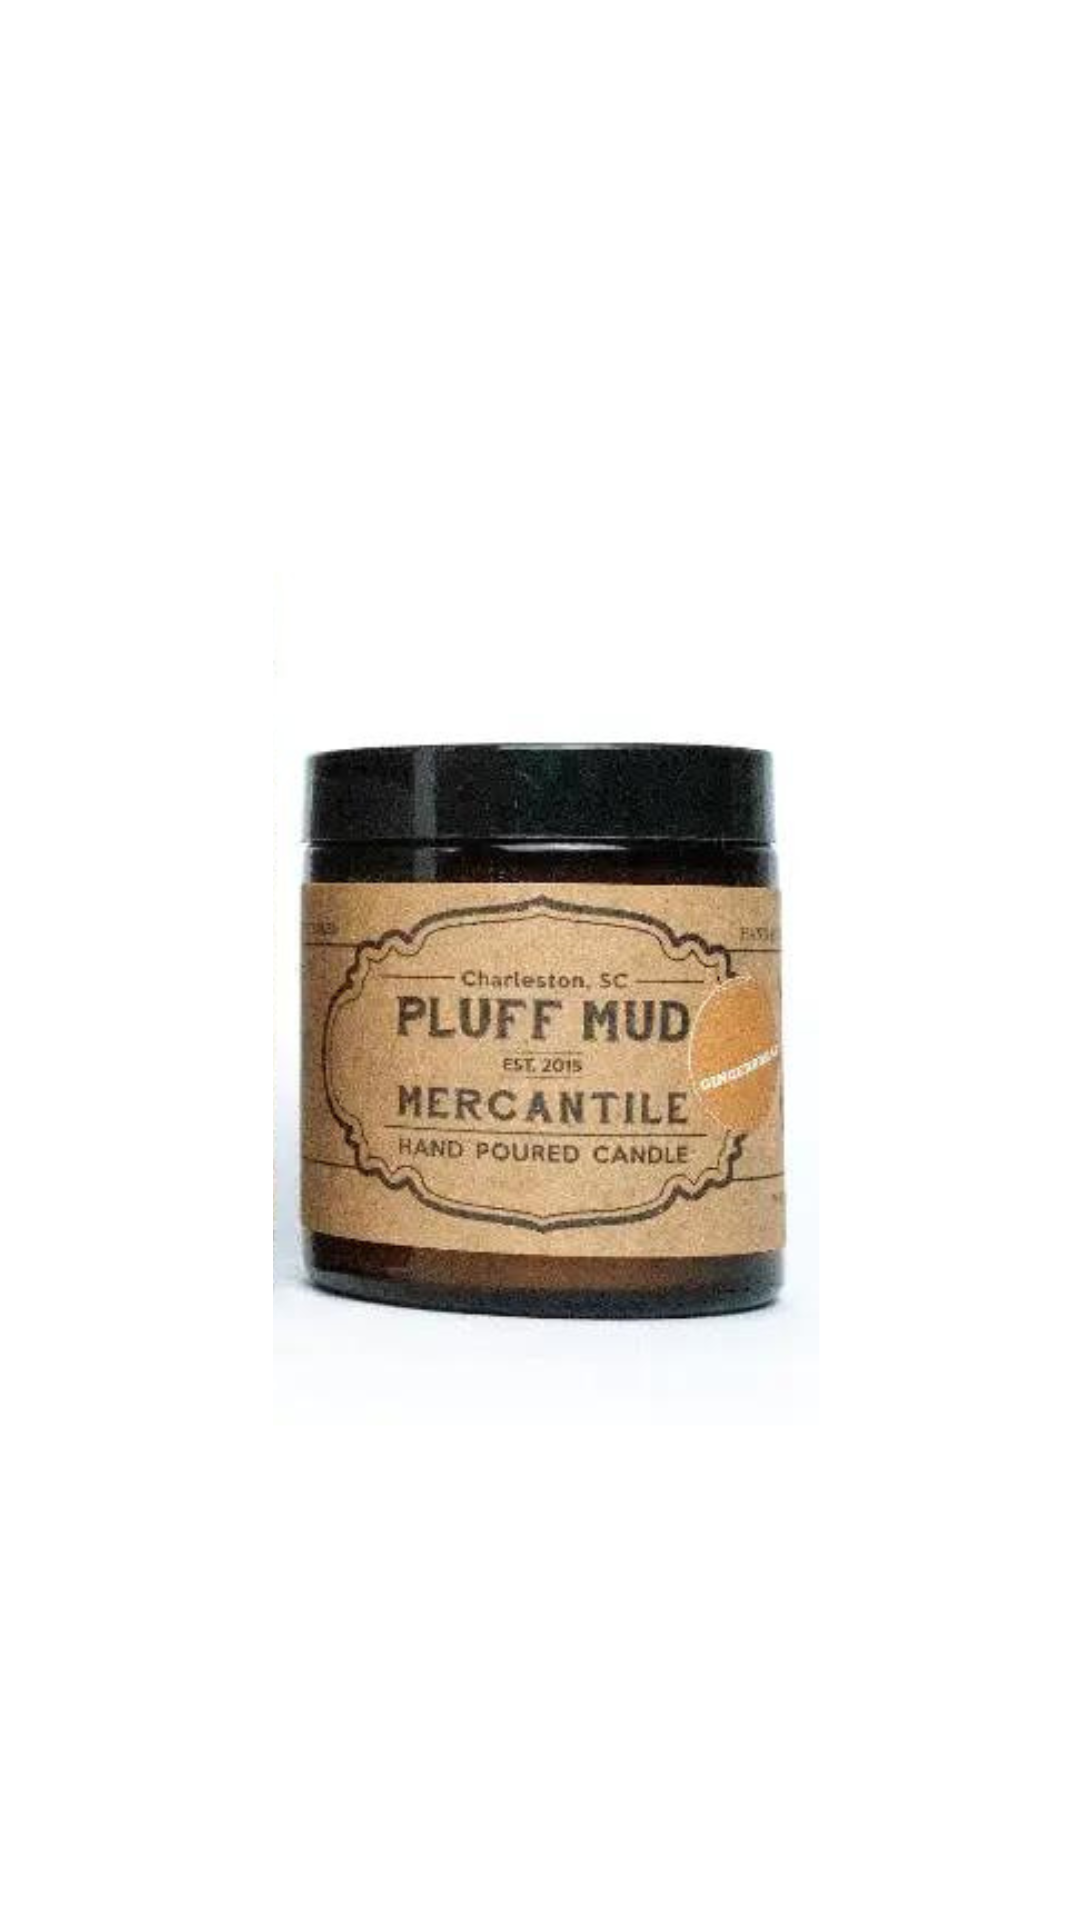 Pluff Mud Hand Poured Soy Candle - Pluff Mud Mercantile